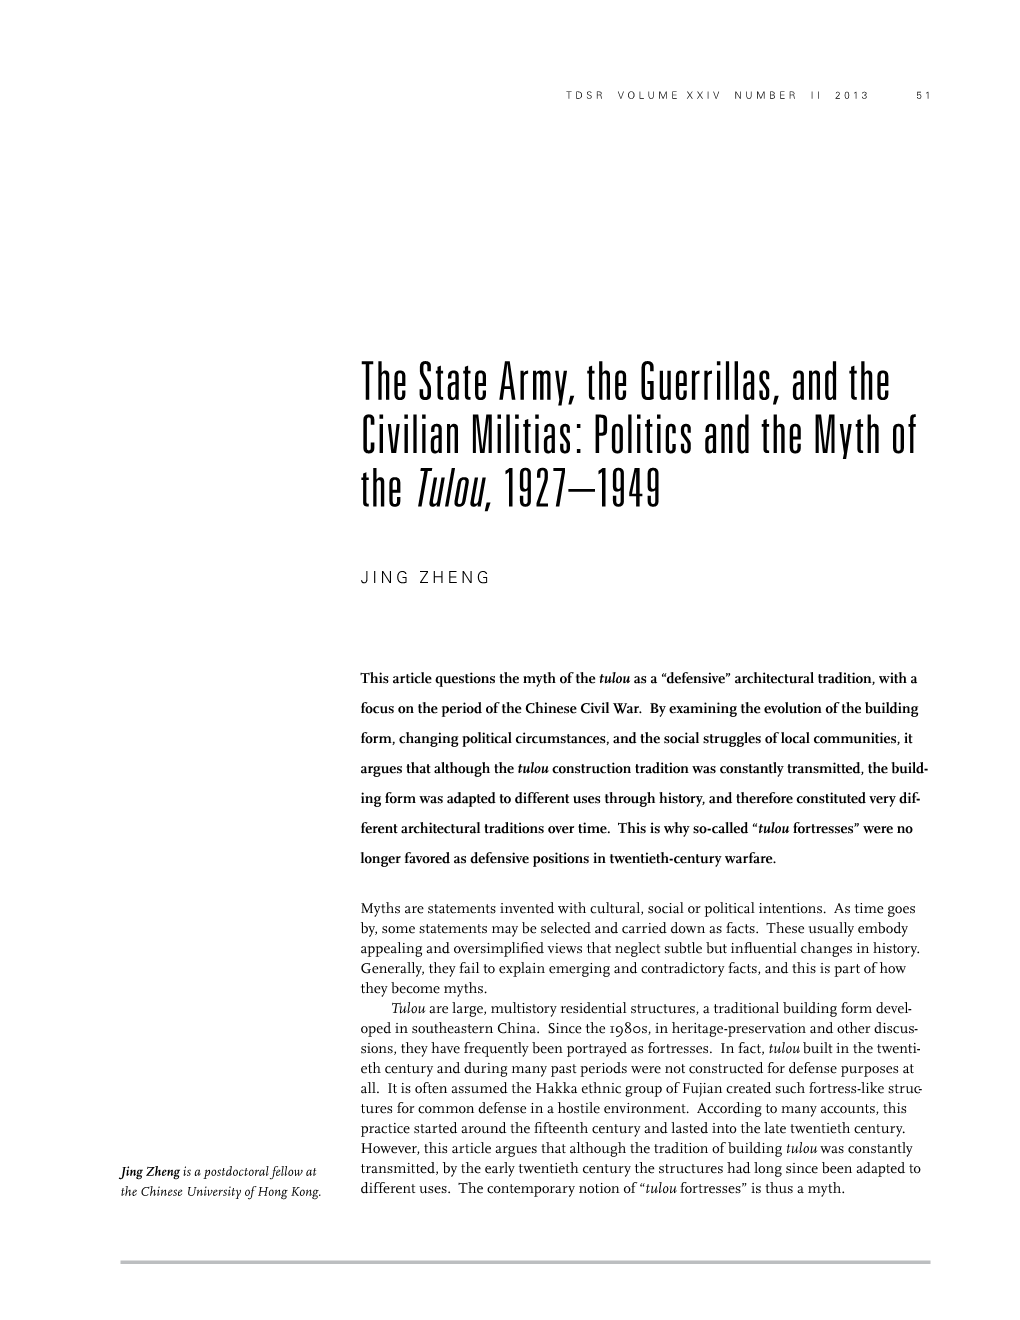 The State Army, the Guerrillas, and the Civilian Militias: Politics and the Myth of the Tulou, 1927–1949